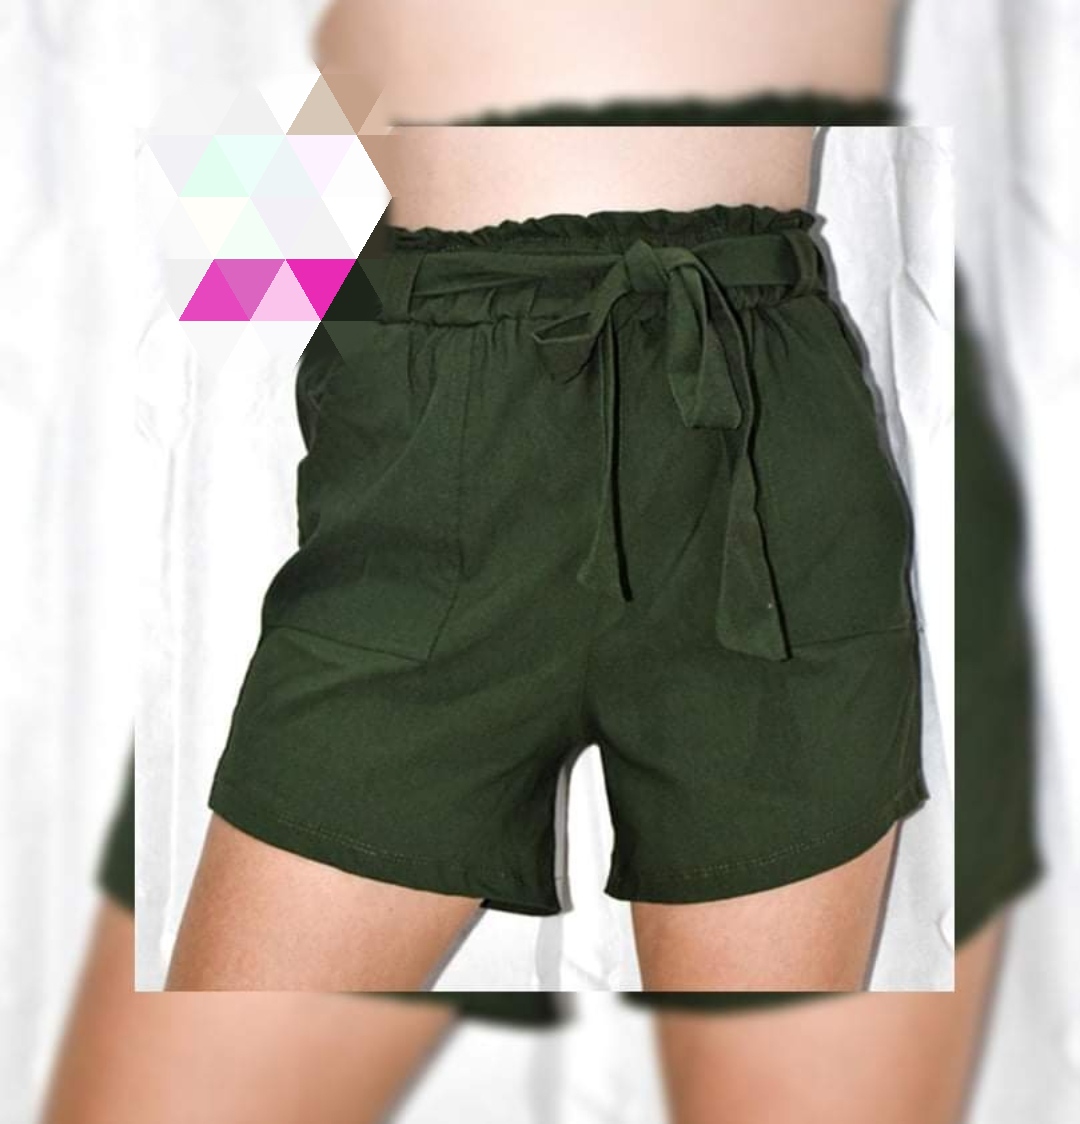 SEXY SHORTS COLORED STRETCHABLE FOR WOMENS (fit to 25-30 waist)